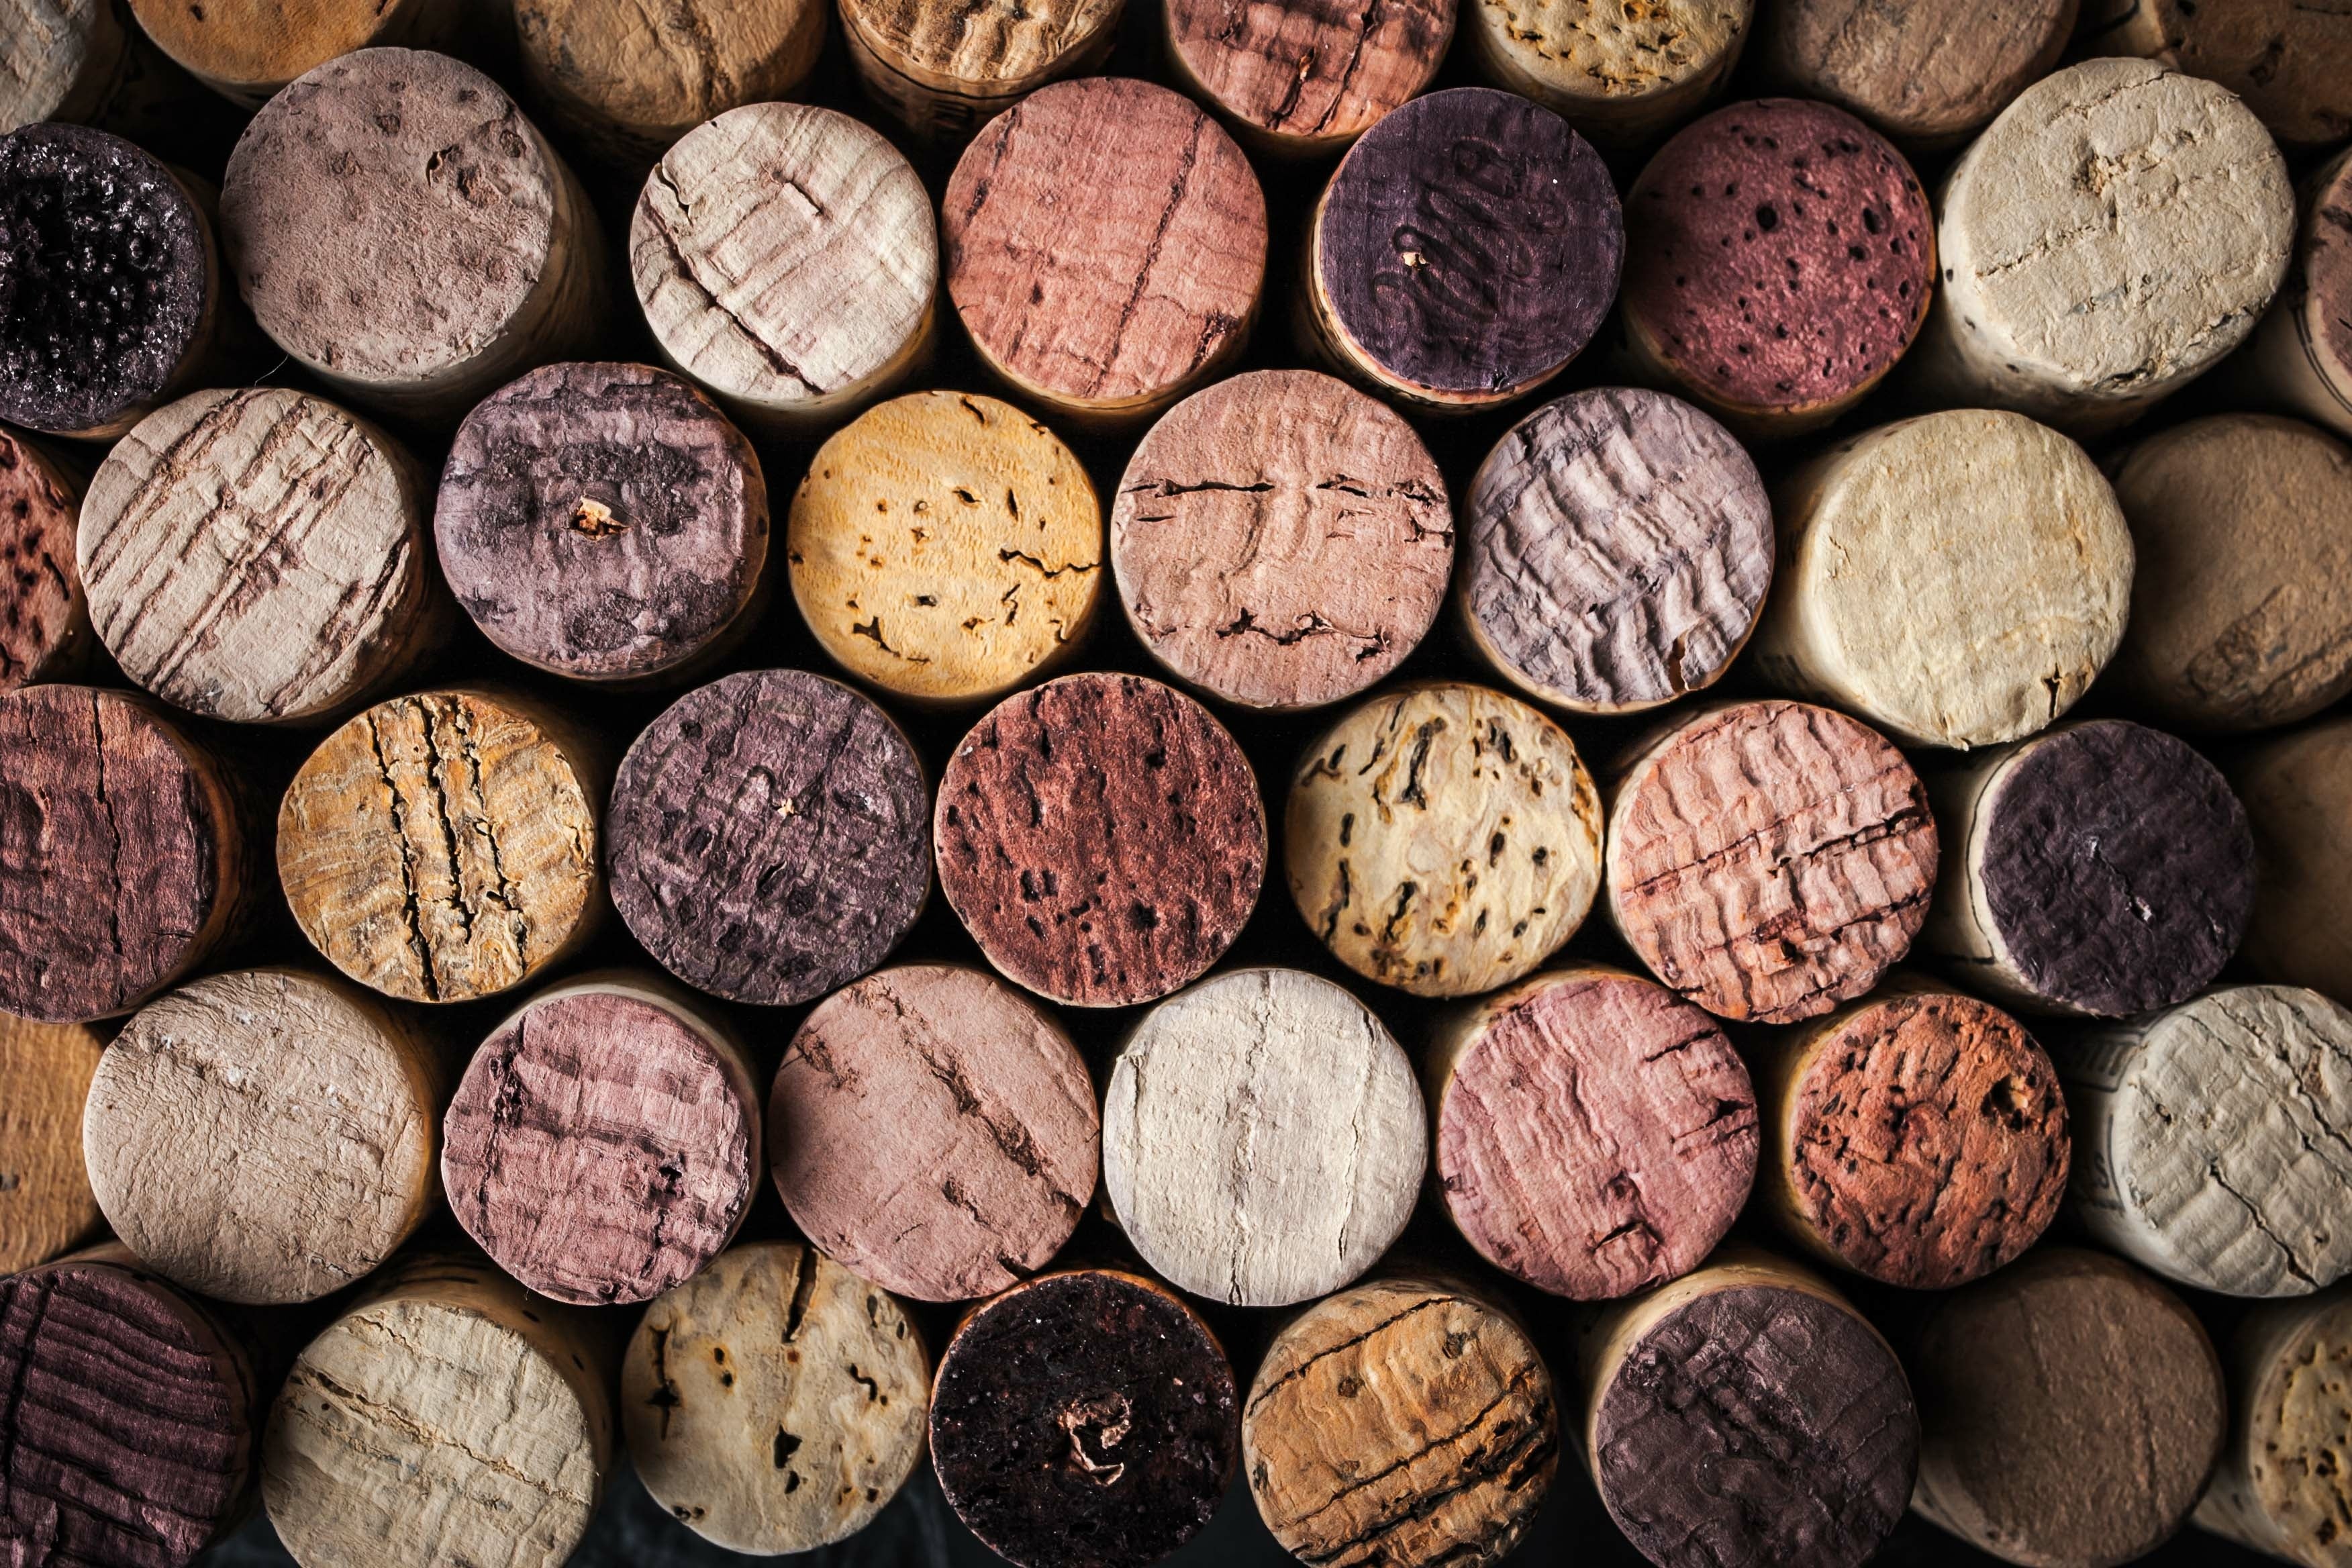 All About Resealing Corks, Plus 5 Fun Cork Facts